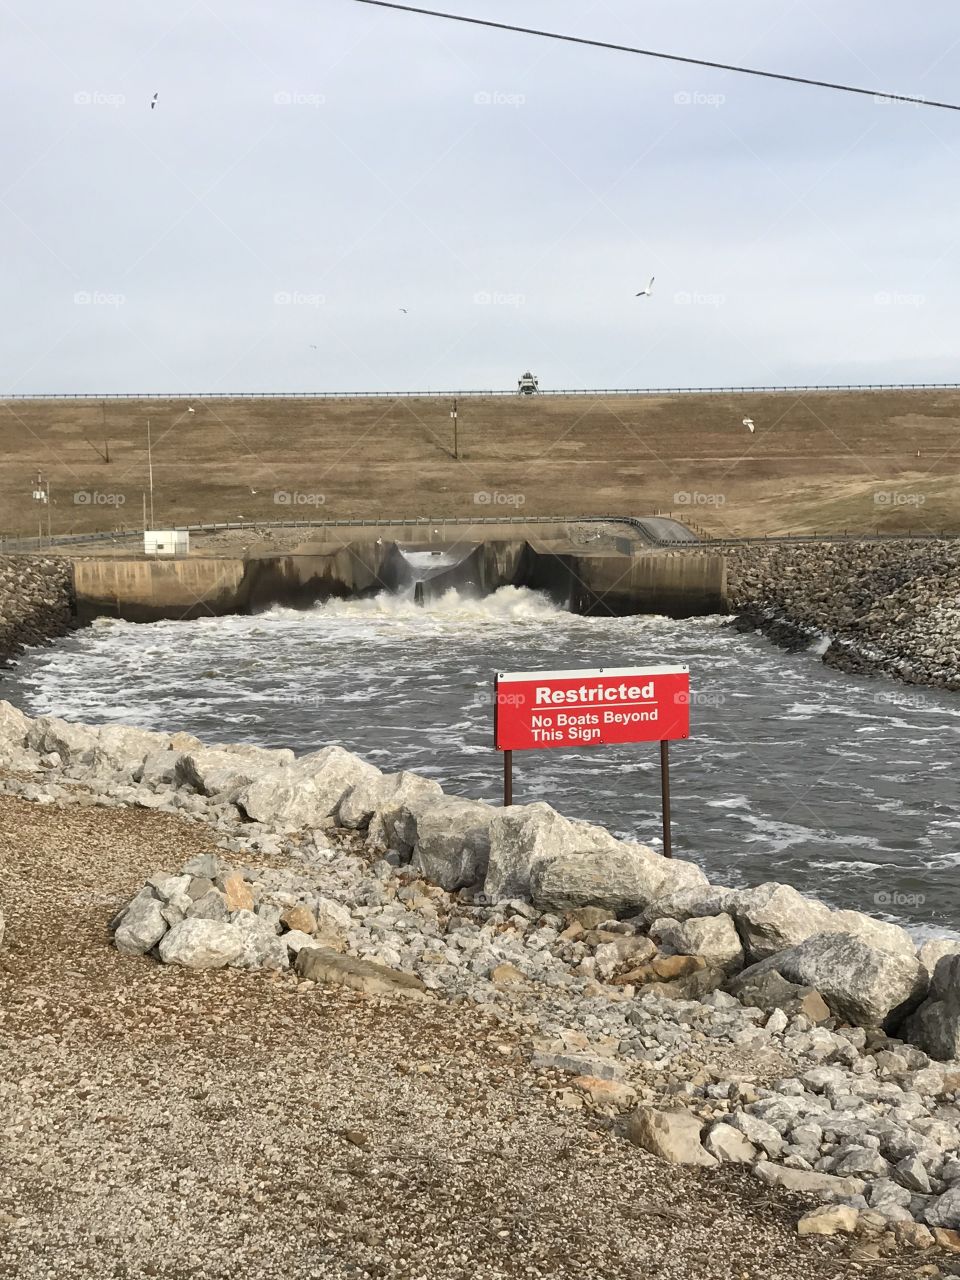 US Army Corps of Engineers OOlogah Lake Dam, Oologah, Oklahoma winter January water release area with sign identifying restricted area, seagull birds fishing by flood gates, rip rap rocks along water channel